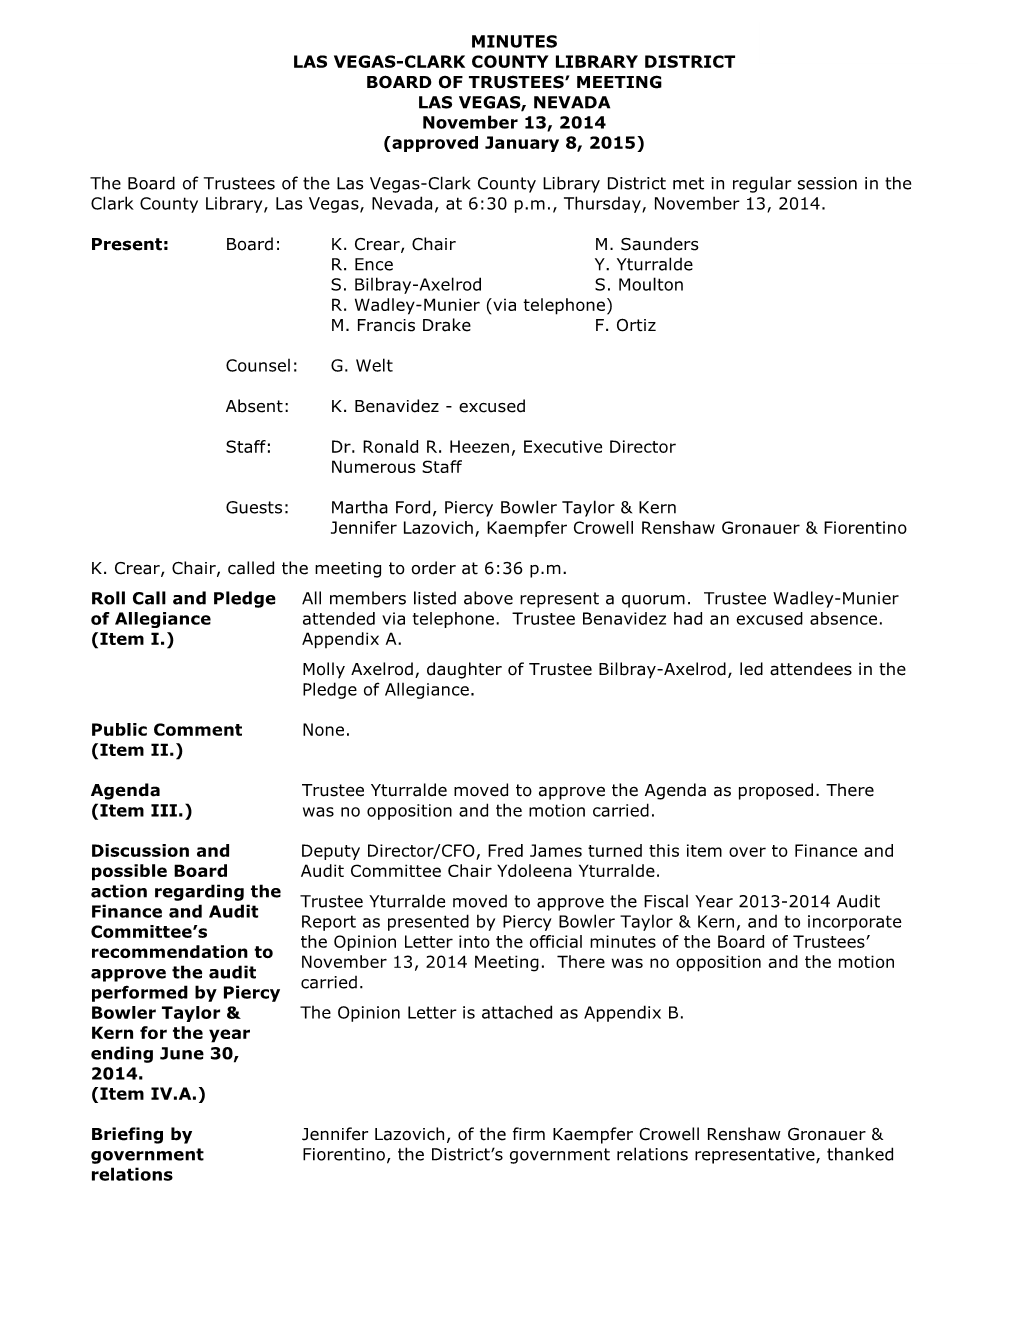 MINUTES LAS VEGAS-CLARK COUNTY LIBRARY DISTRICT BOARD of TRUSTEES’ MEETING LAS VEGAS, NEVADA November 13, 2014 (Approved January 8, 2015)